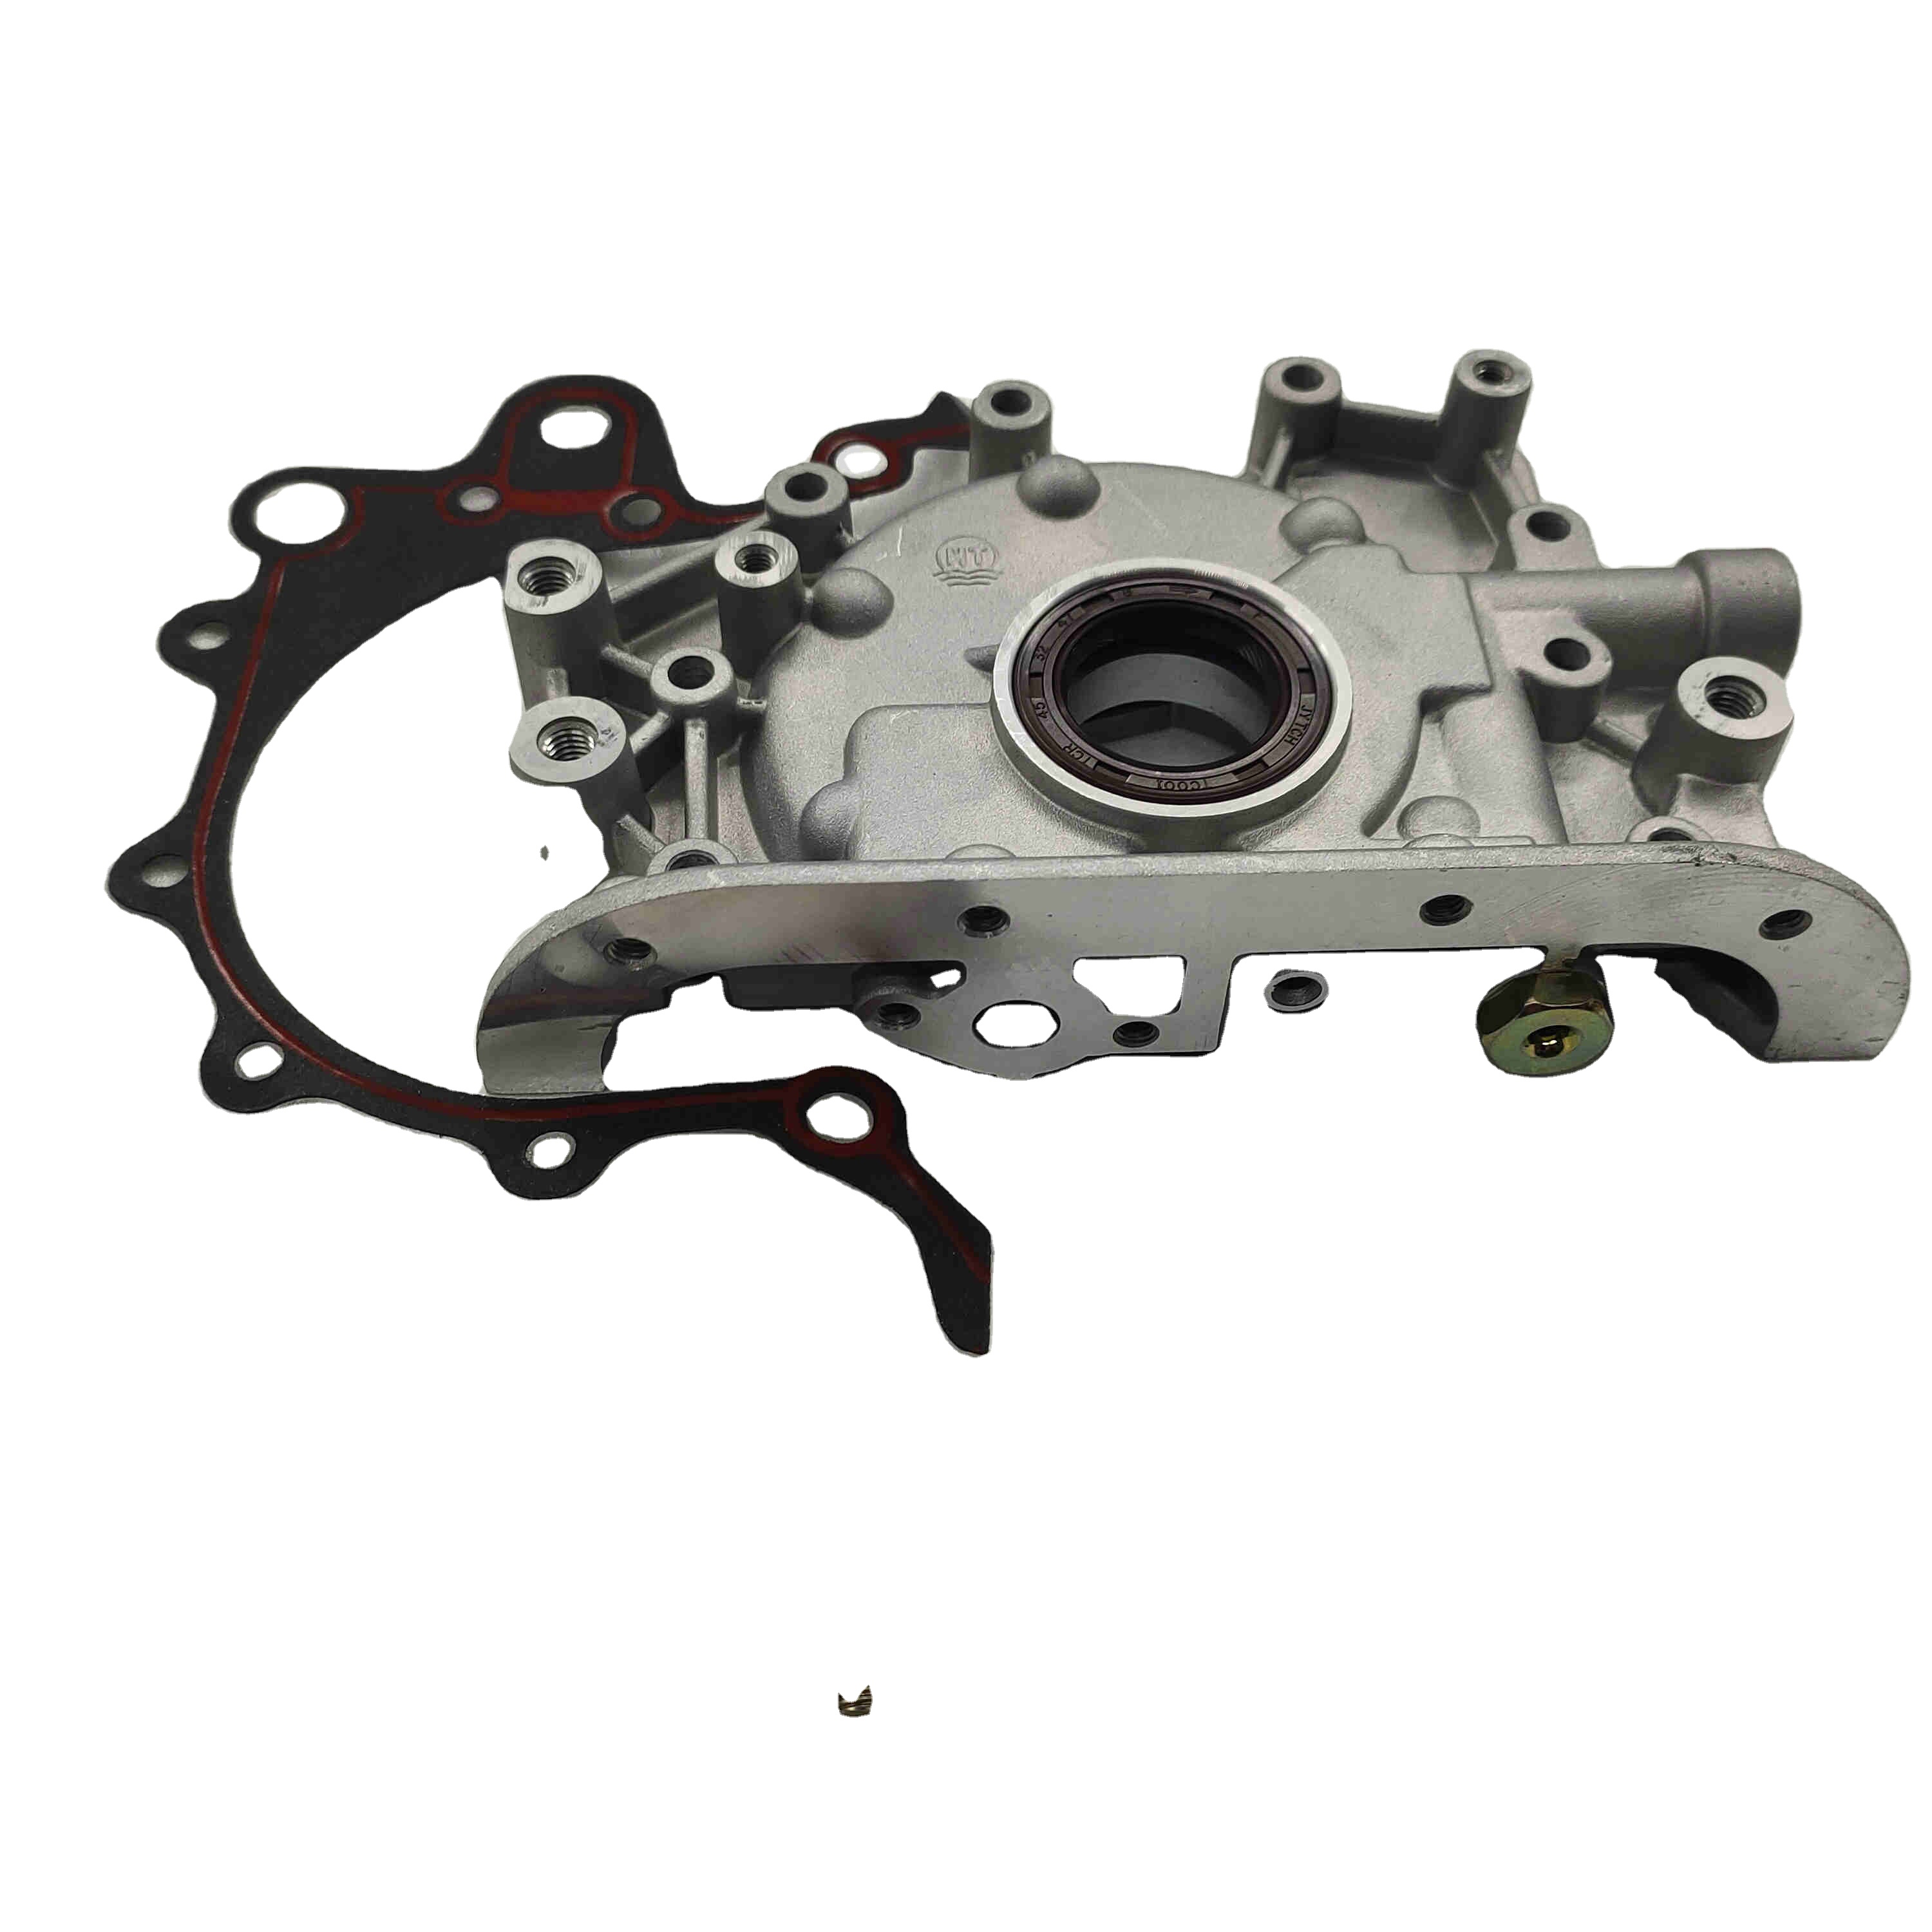 Professional Fuel Pump Assembly High quality oil pump High Pressure Common rail diesel fuel injection pump assembly for tricycle